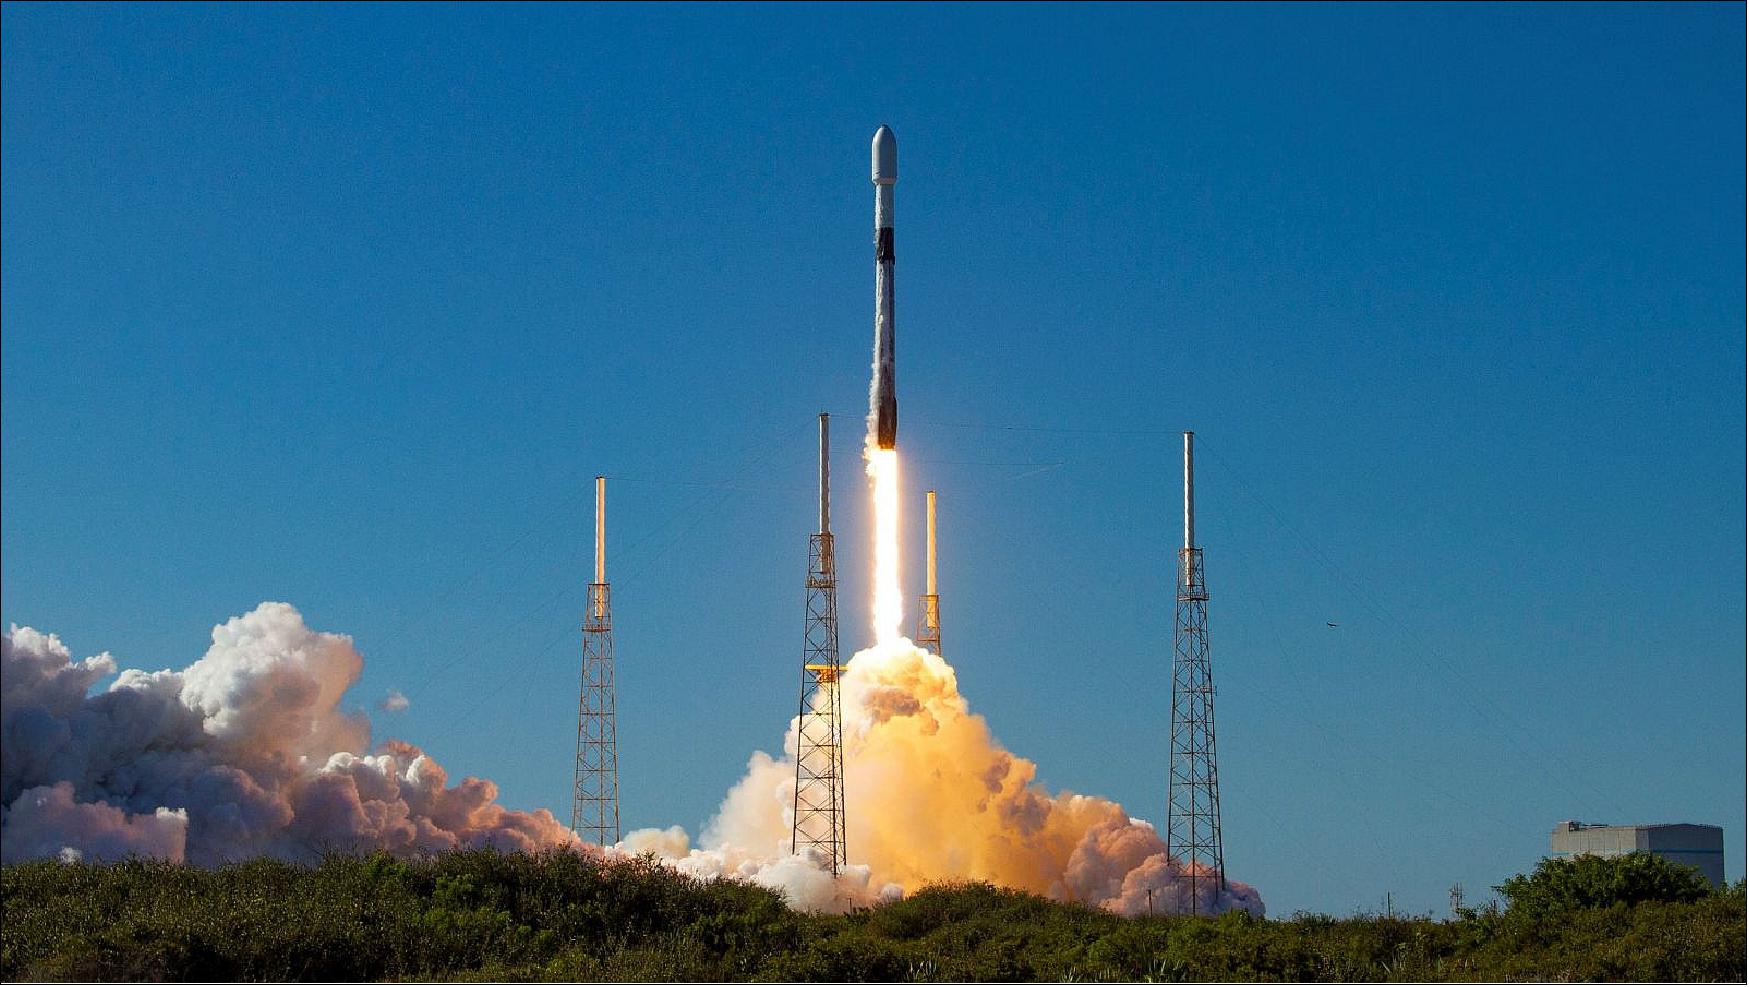 Figure 5: A Falcon 9 launches the Transporter-3 rideshare mission from Cape Canaveral, Florida (image credit: SpaceX)